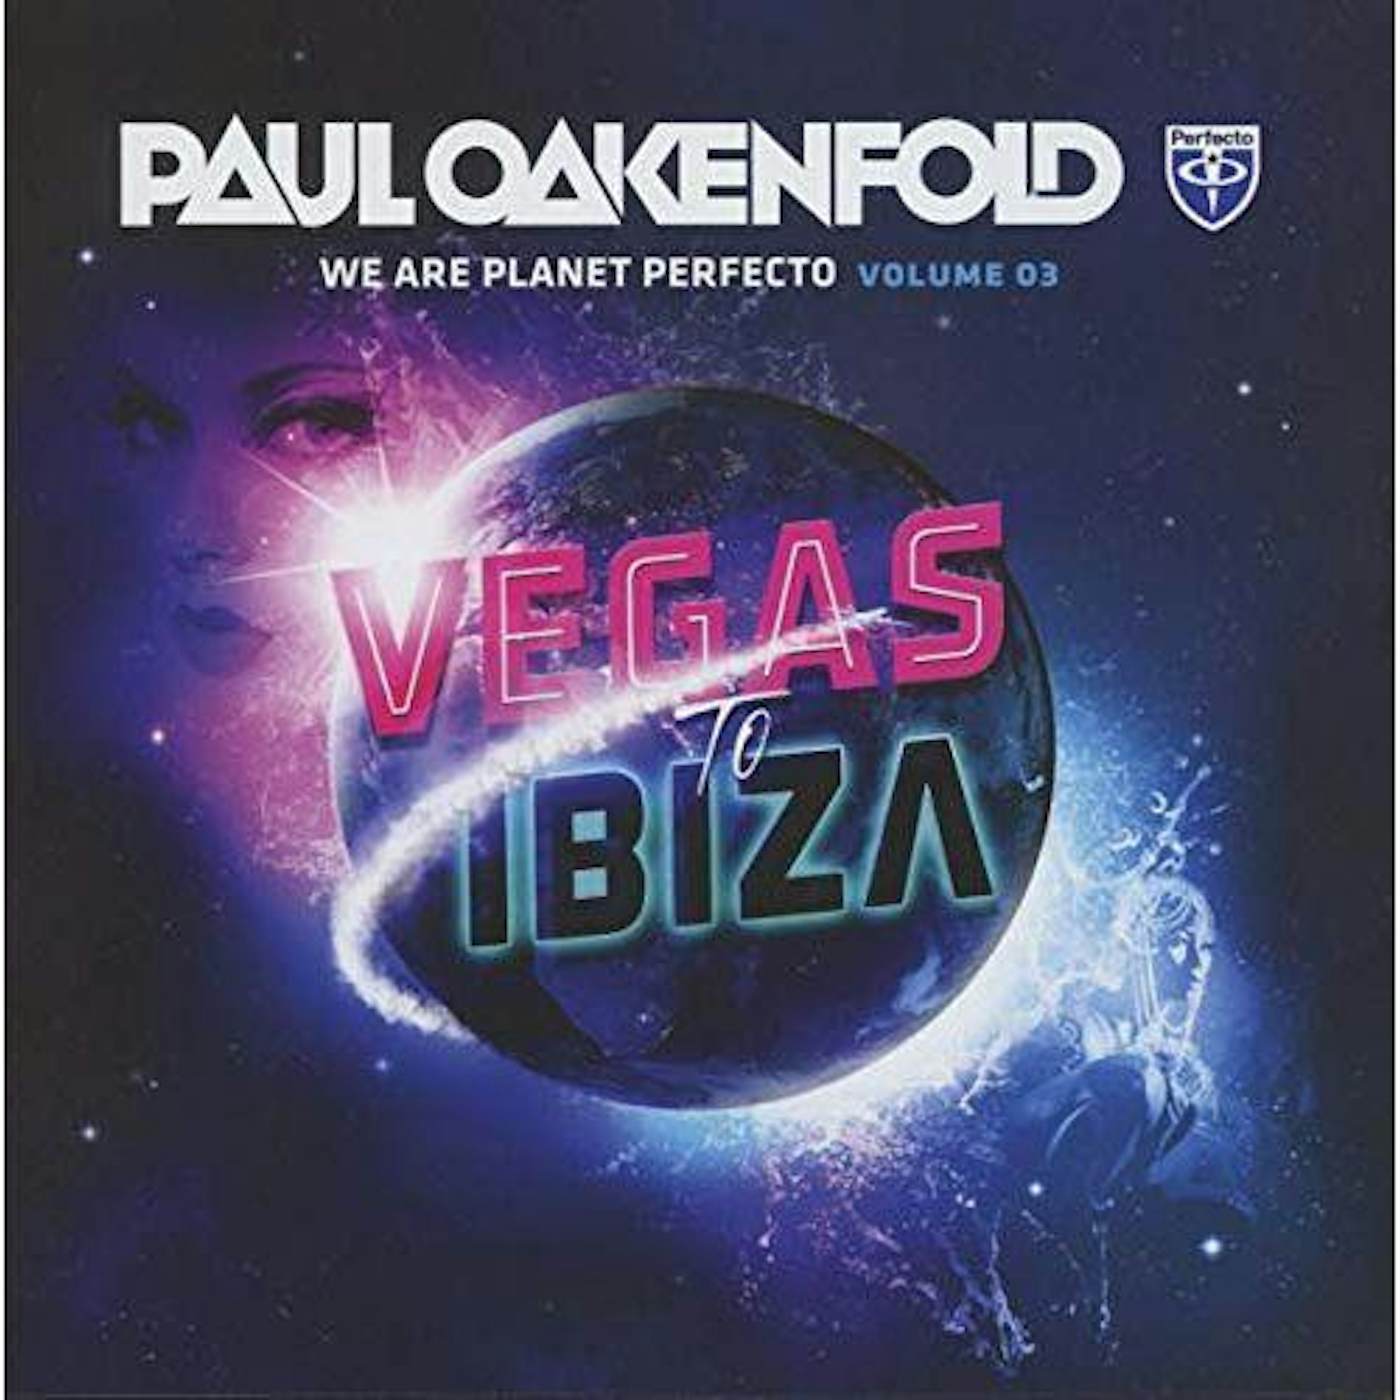 Paul Oakenfold WE ARE PLANET PERFECTO VOL 3 CD